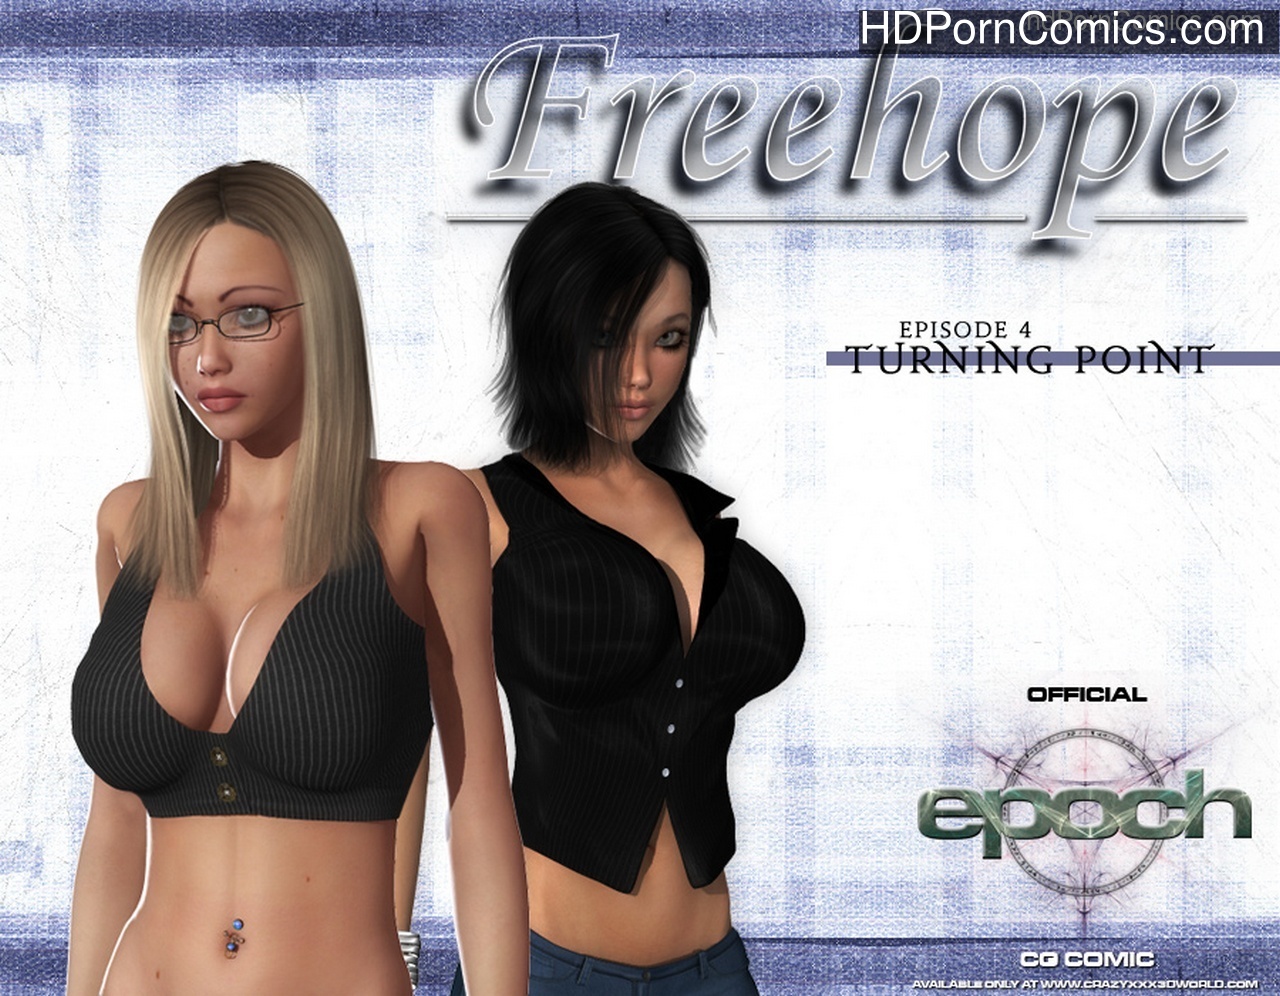 Xxx Points Hd - Freehope 4 - Turning Point Sex Comic - HD Porn Comics